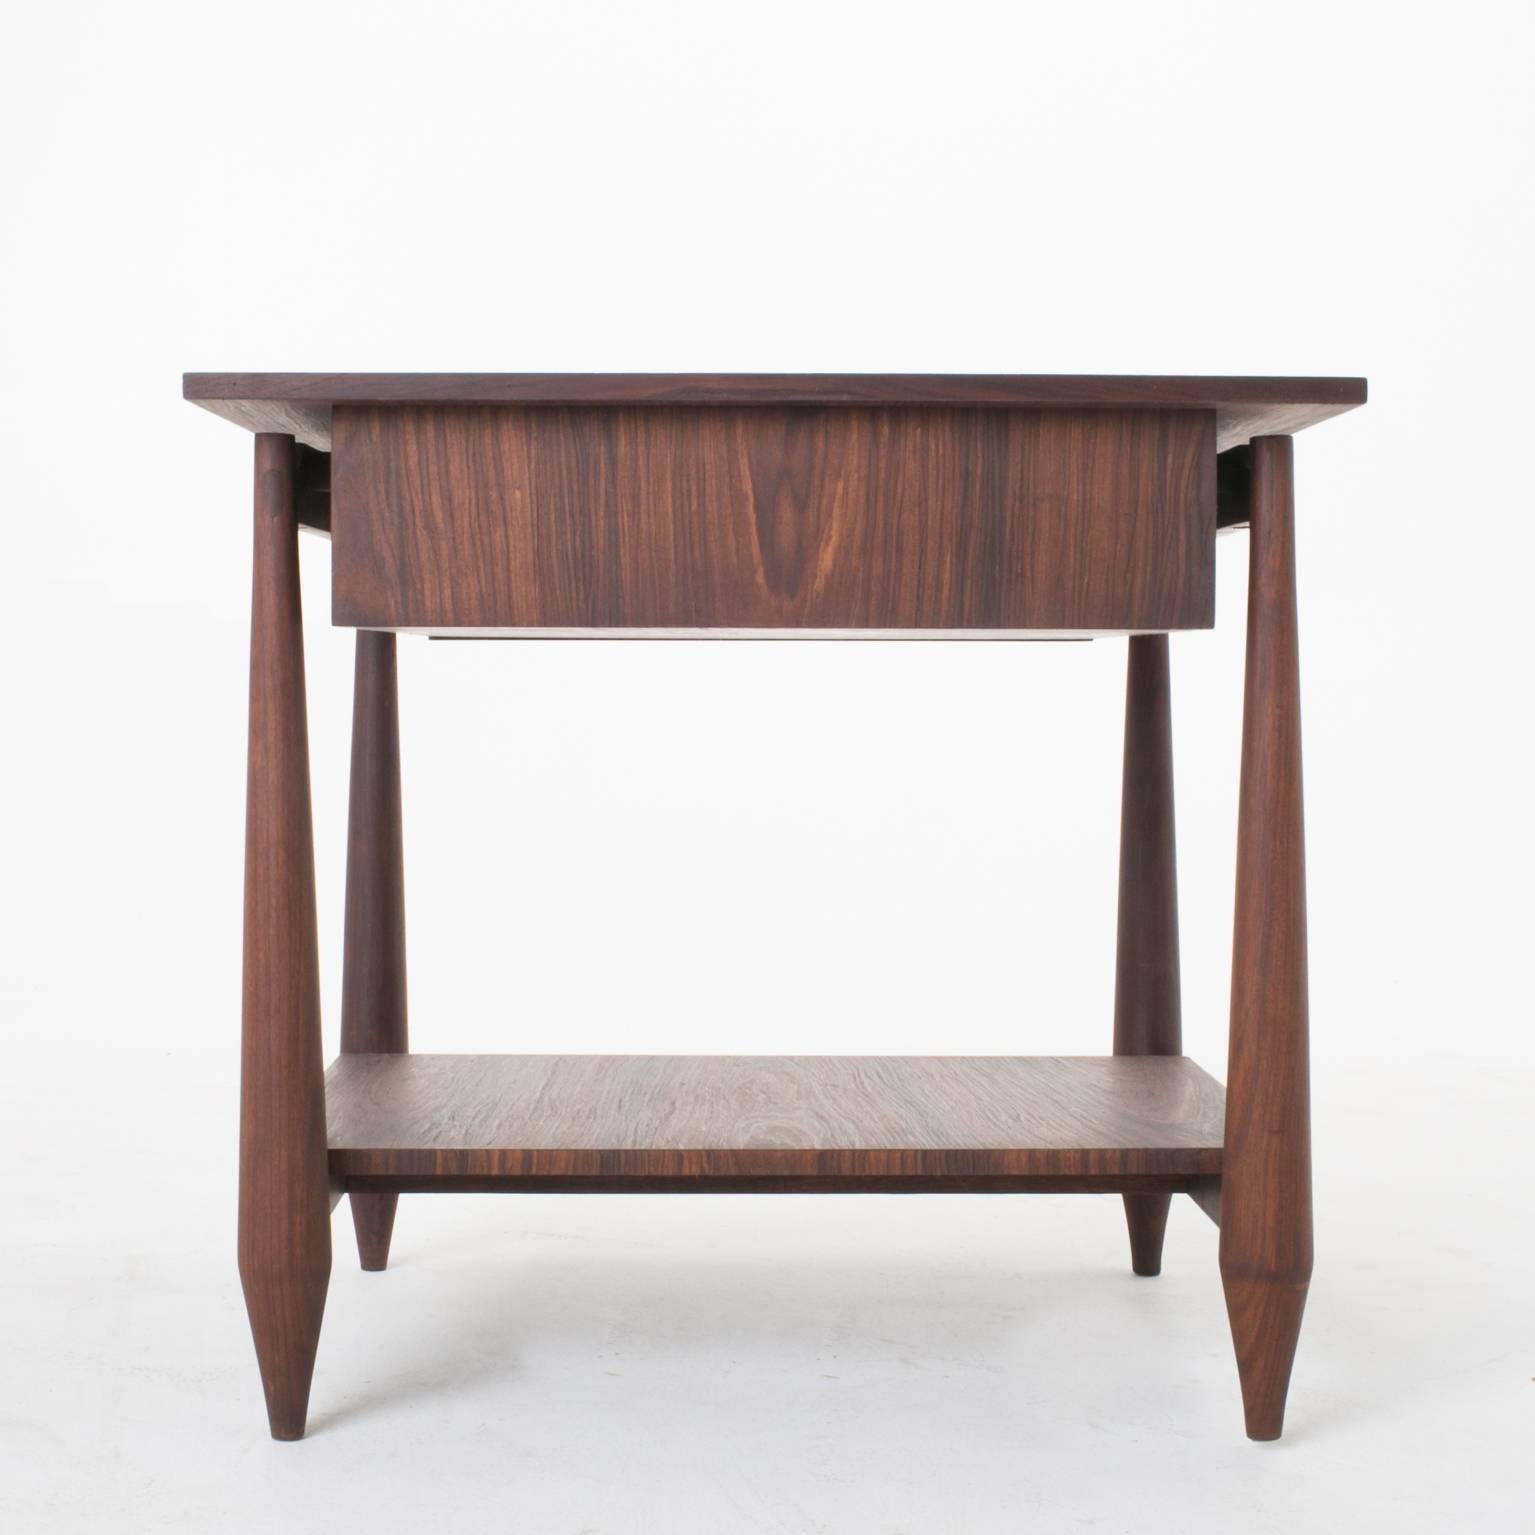 Mid-20th Century Pair of Brazilian Rosewood Nightstands with Sculptural Legs and Floating Drawer For Sale